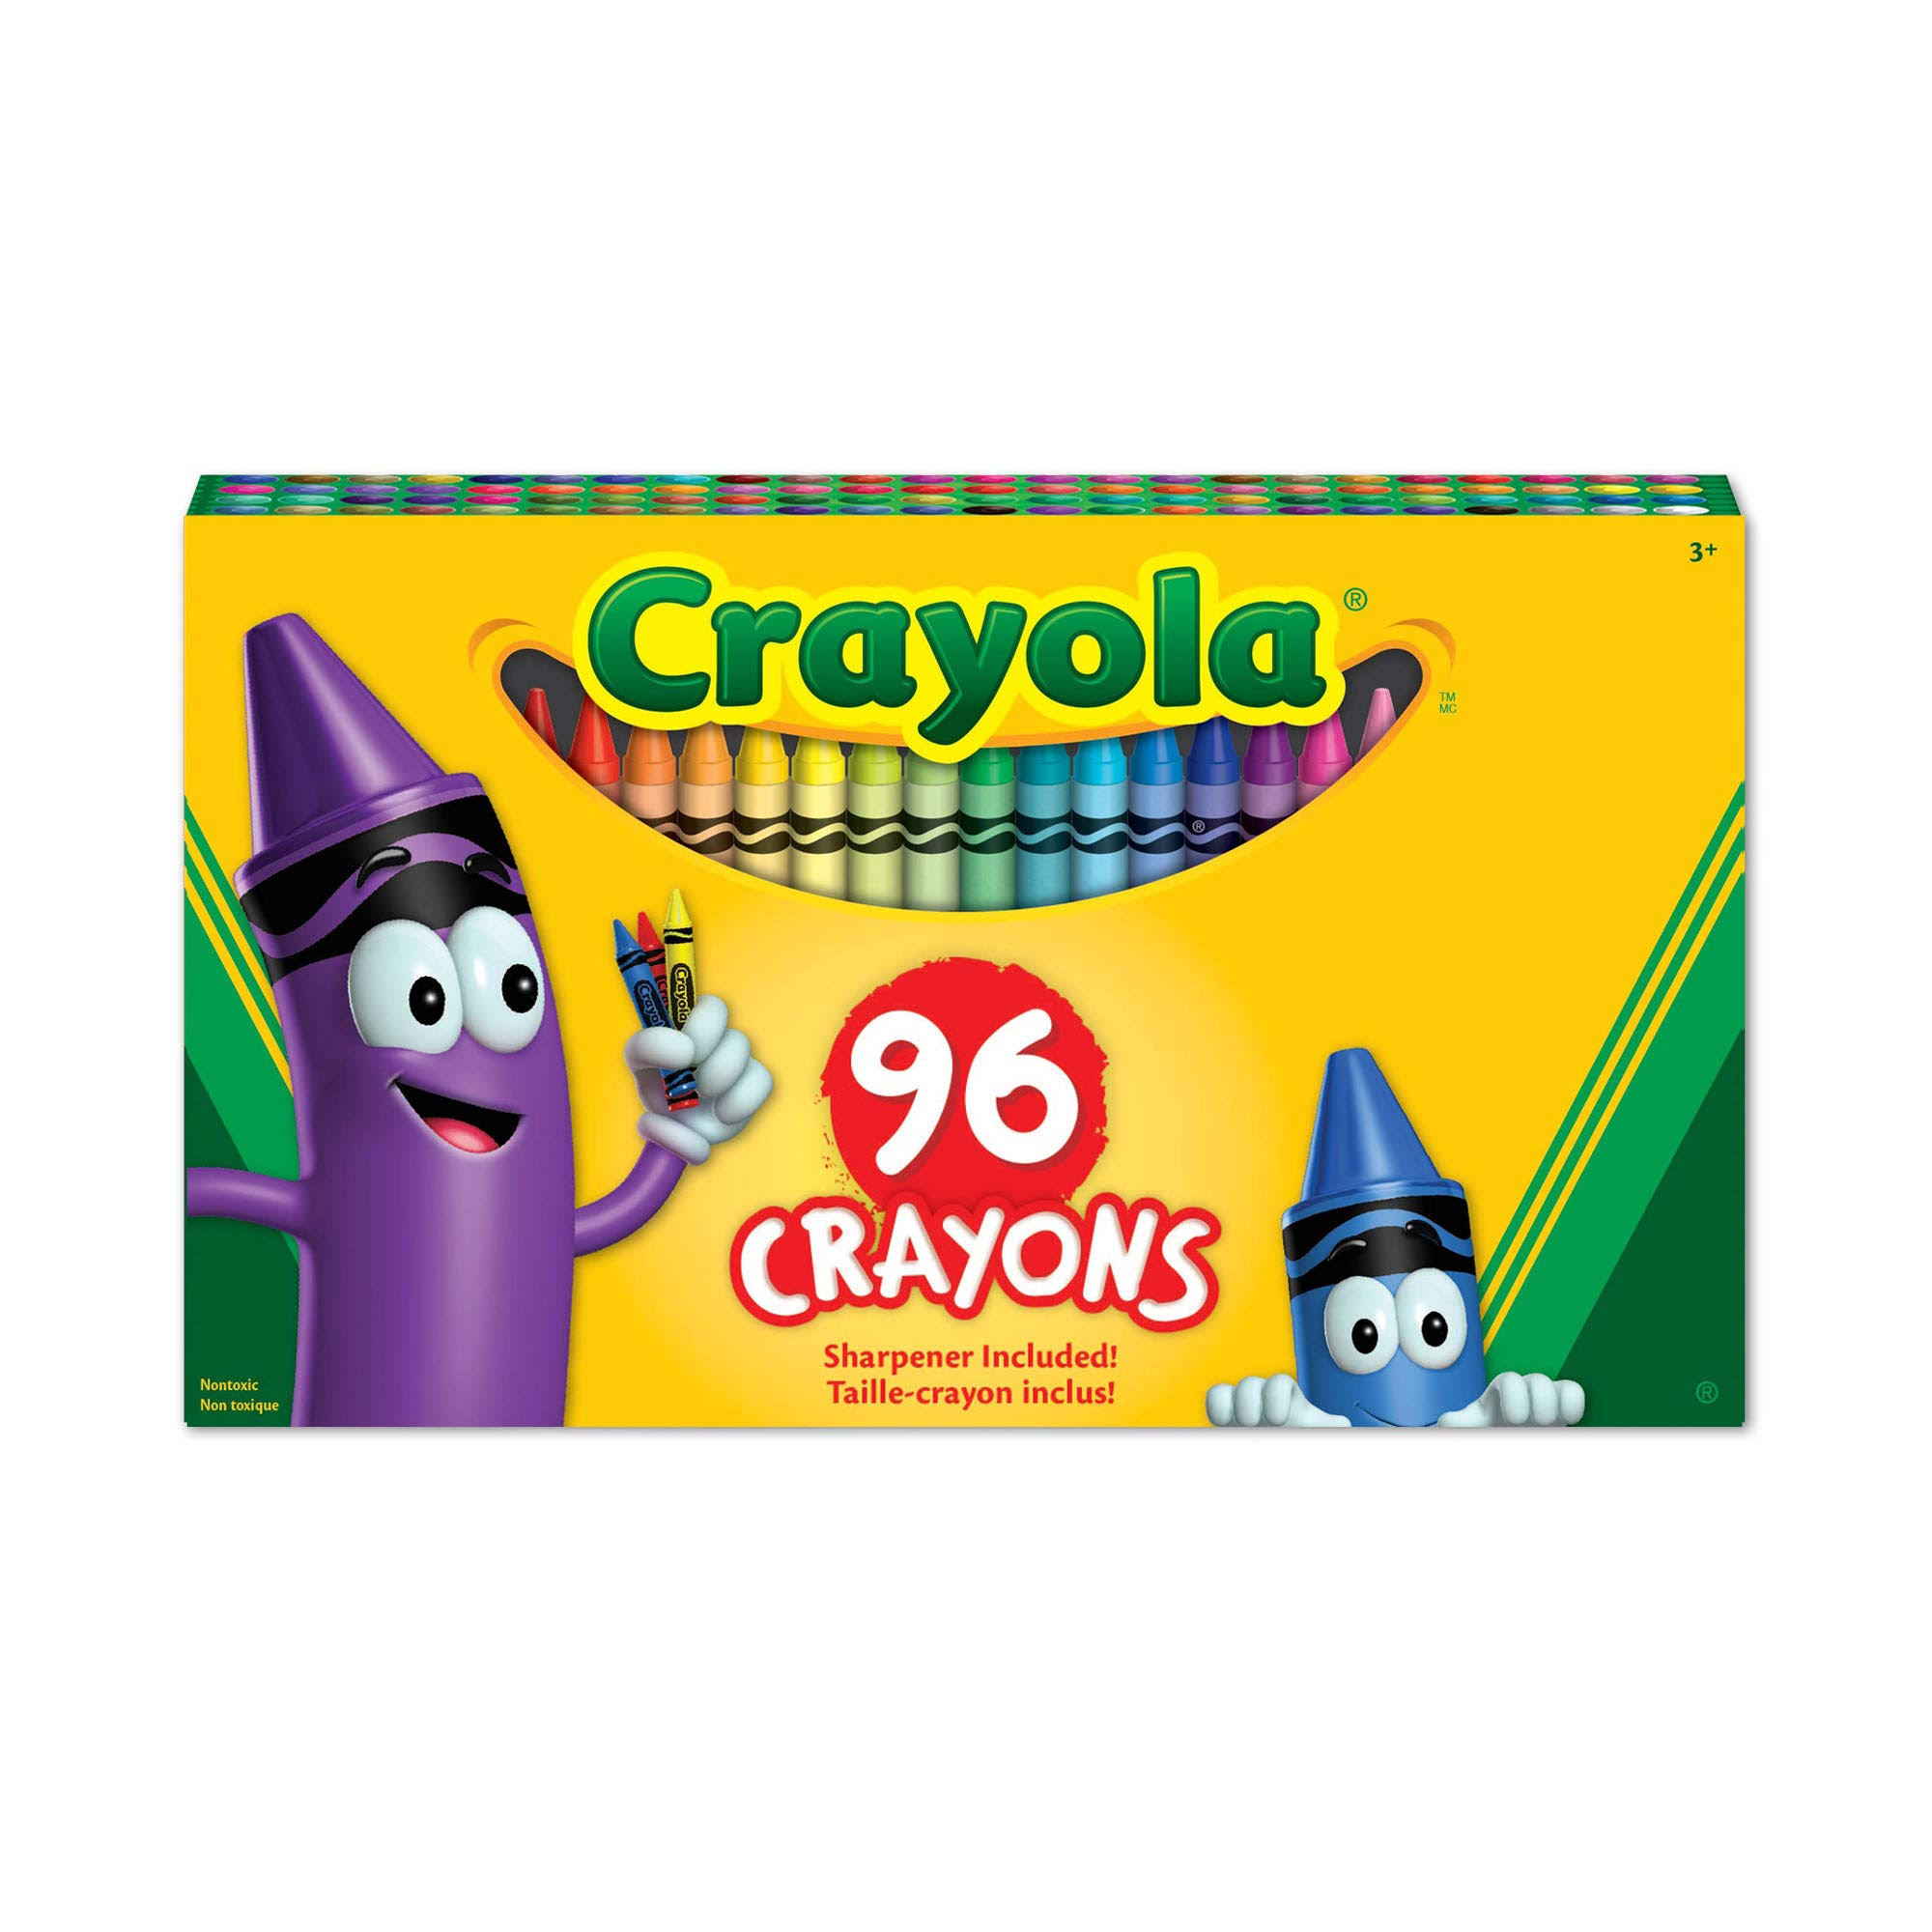 Crayola Crayons With Built In Sharpener - 96 Pack